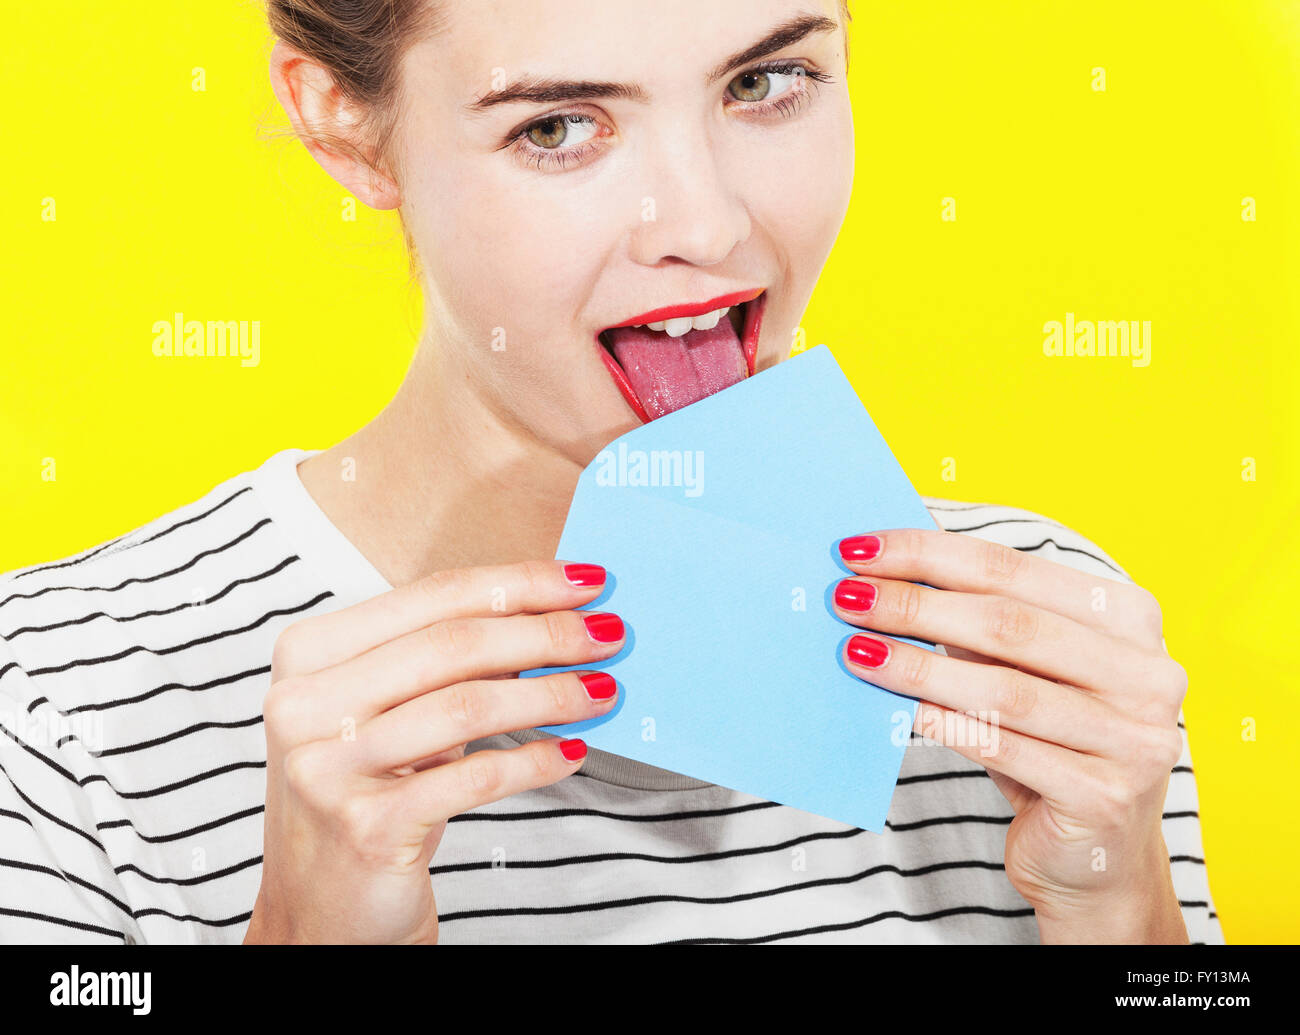 Beautiful woman licking blue envelope against yellow background Stock Photo